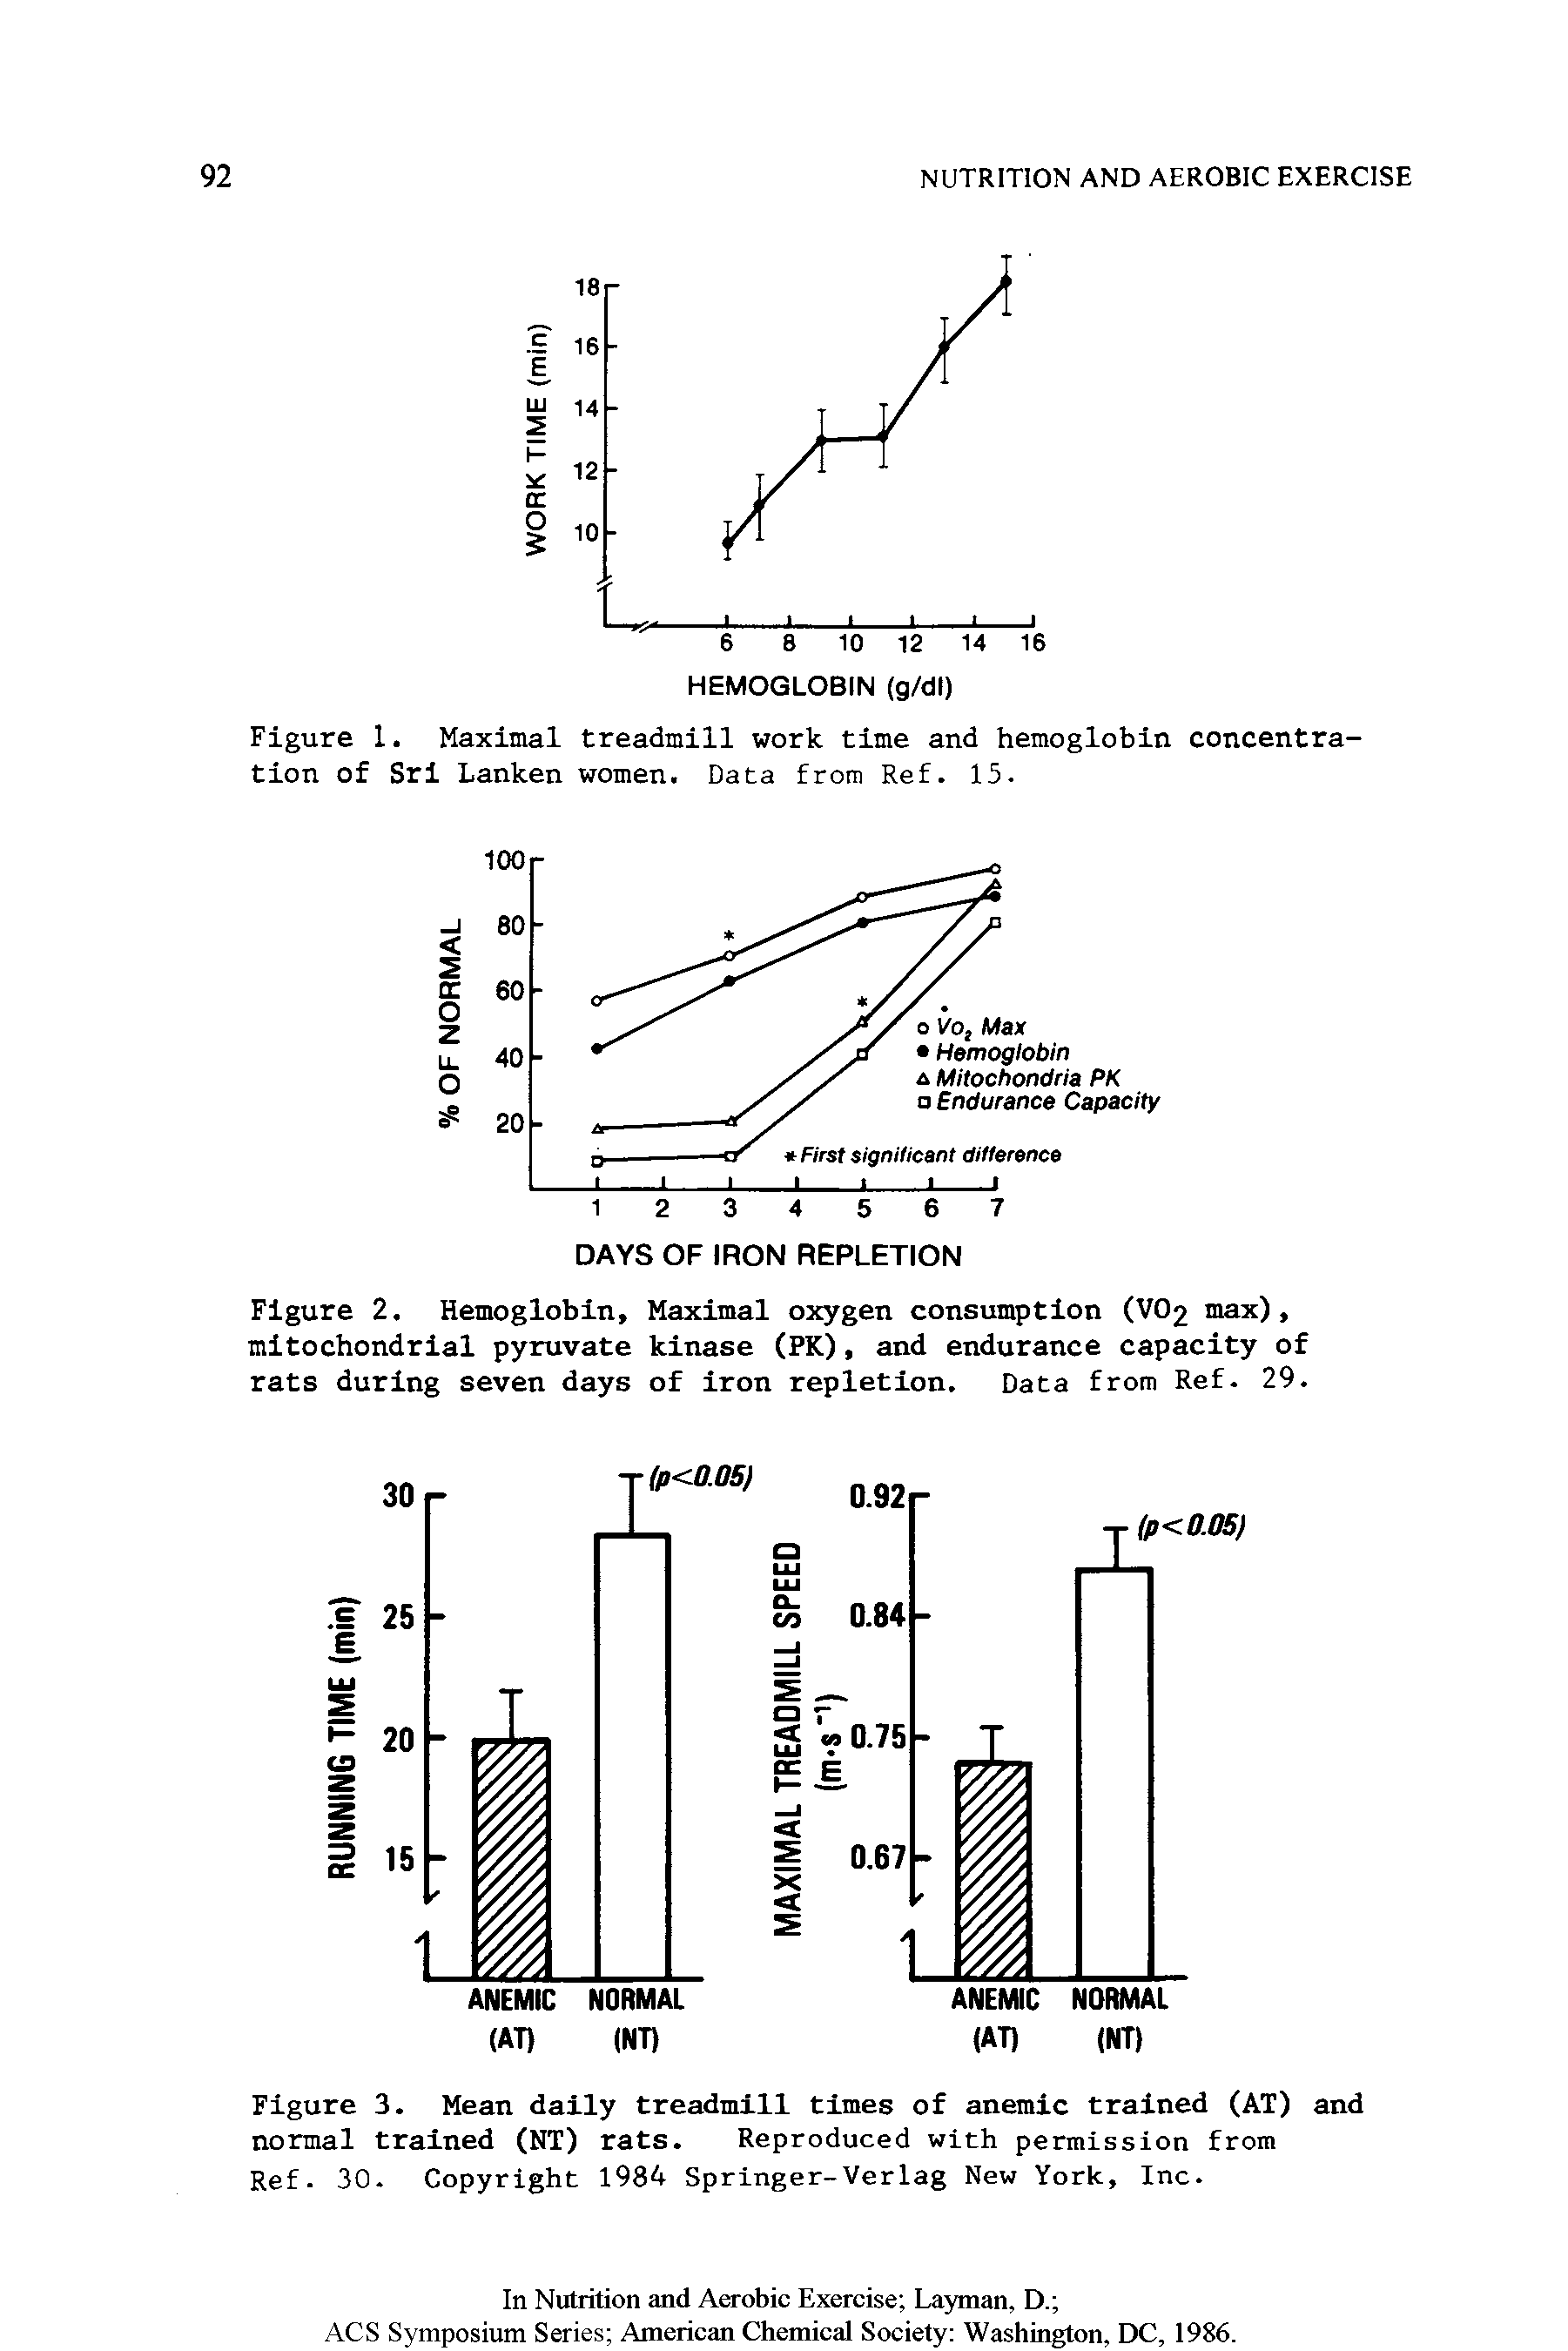 Figure 2. Hemoglobin, Maximal oxygen consumption (VO2 max), mitochondrial pyruvate kinase (PK), and endurance capacity of rats during seven days of iron repletion. Data from Ref. 29.